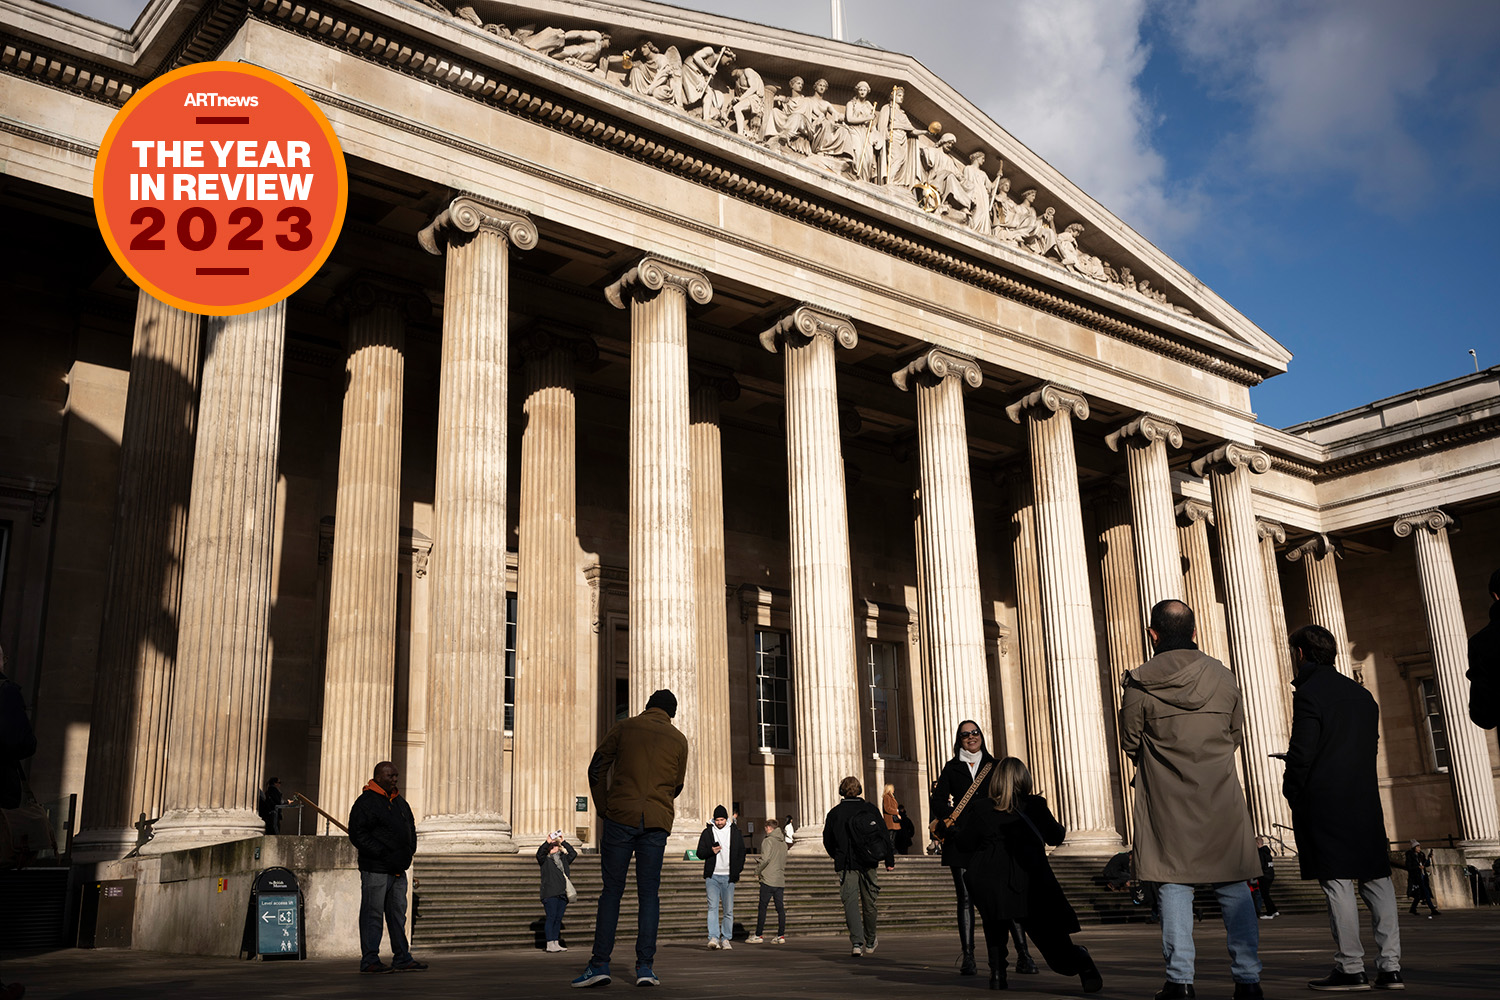 An exterior view of the British Museum in Bloomsbury on 28th November 2023, in London, England.